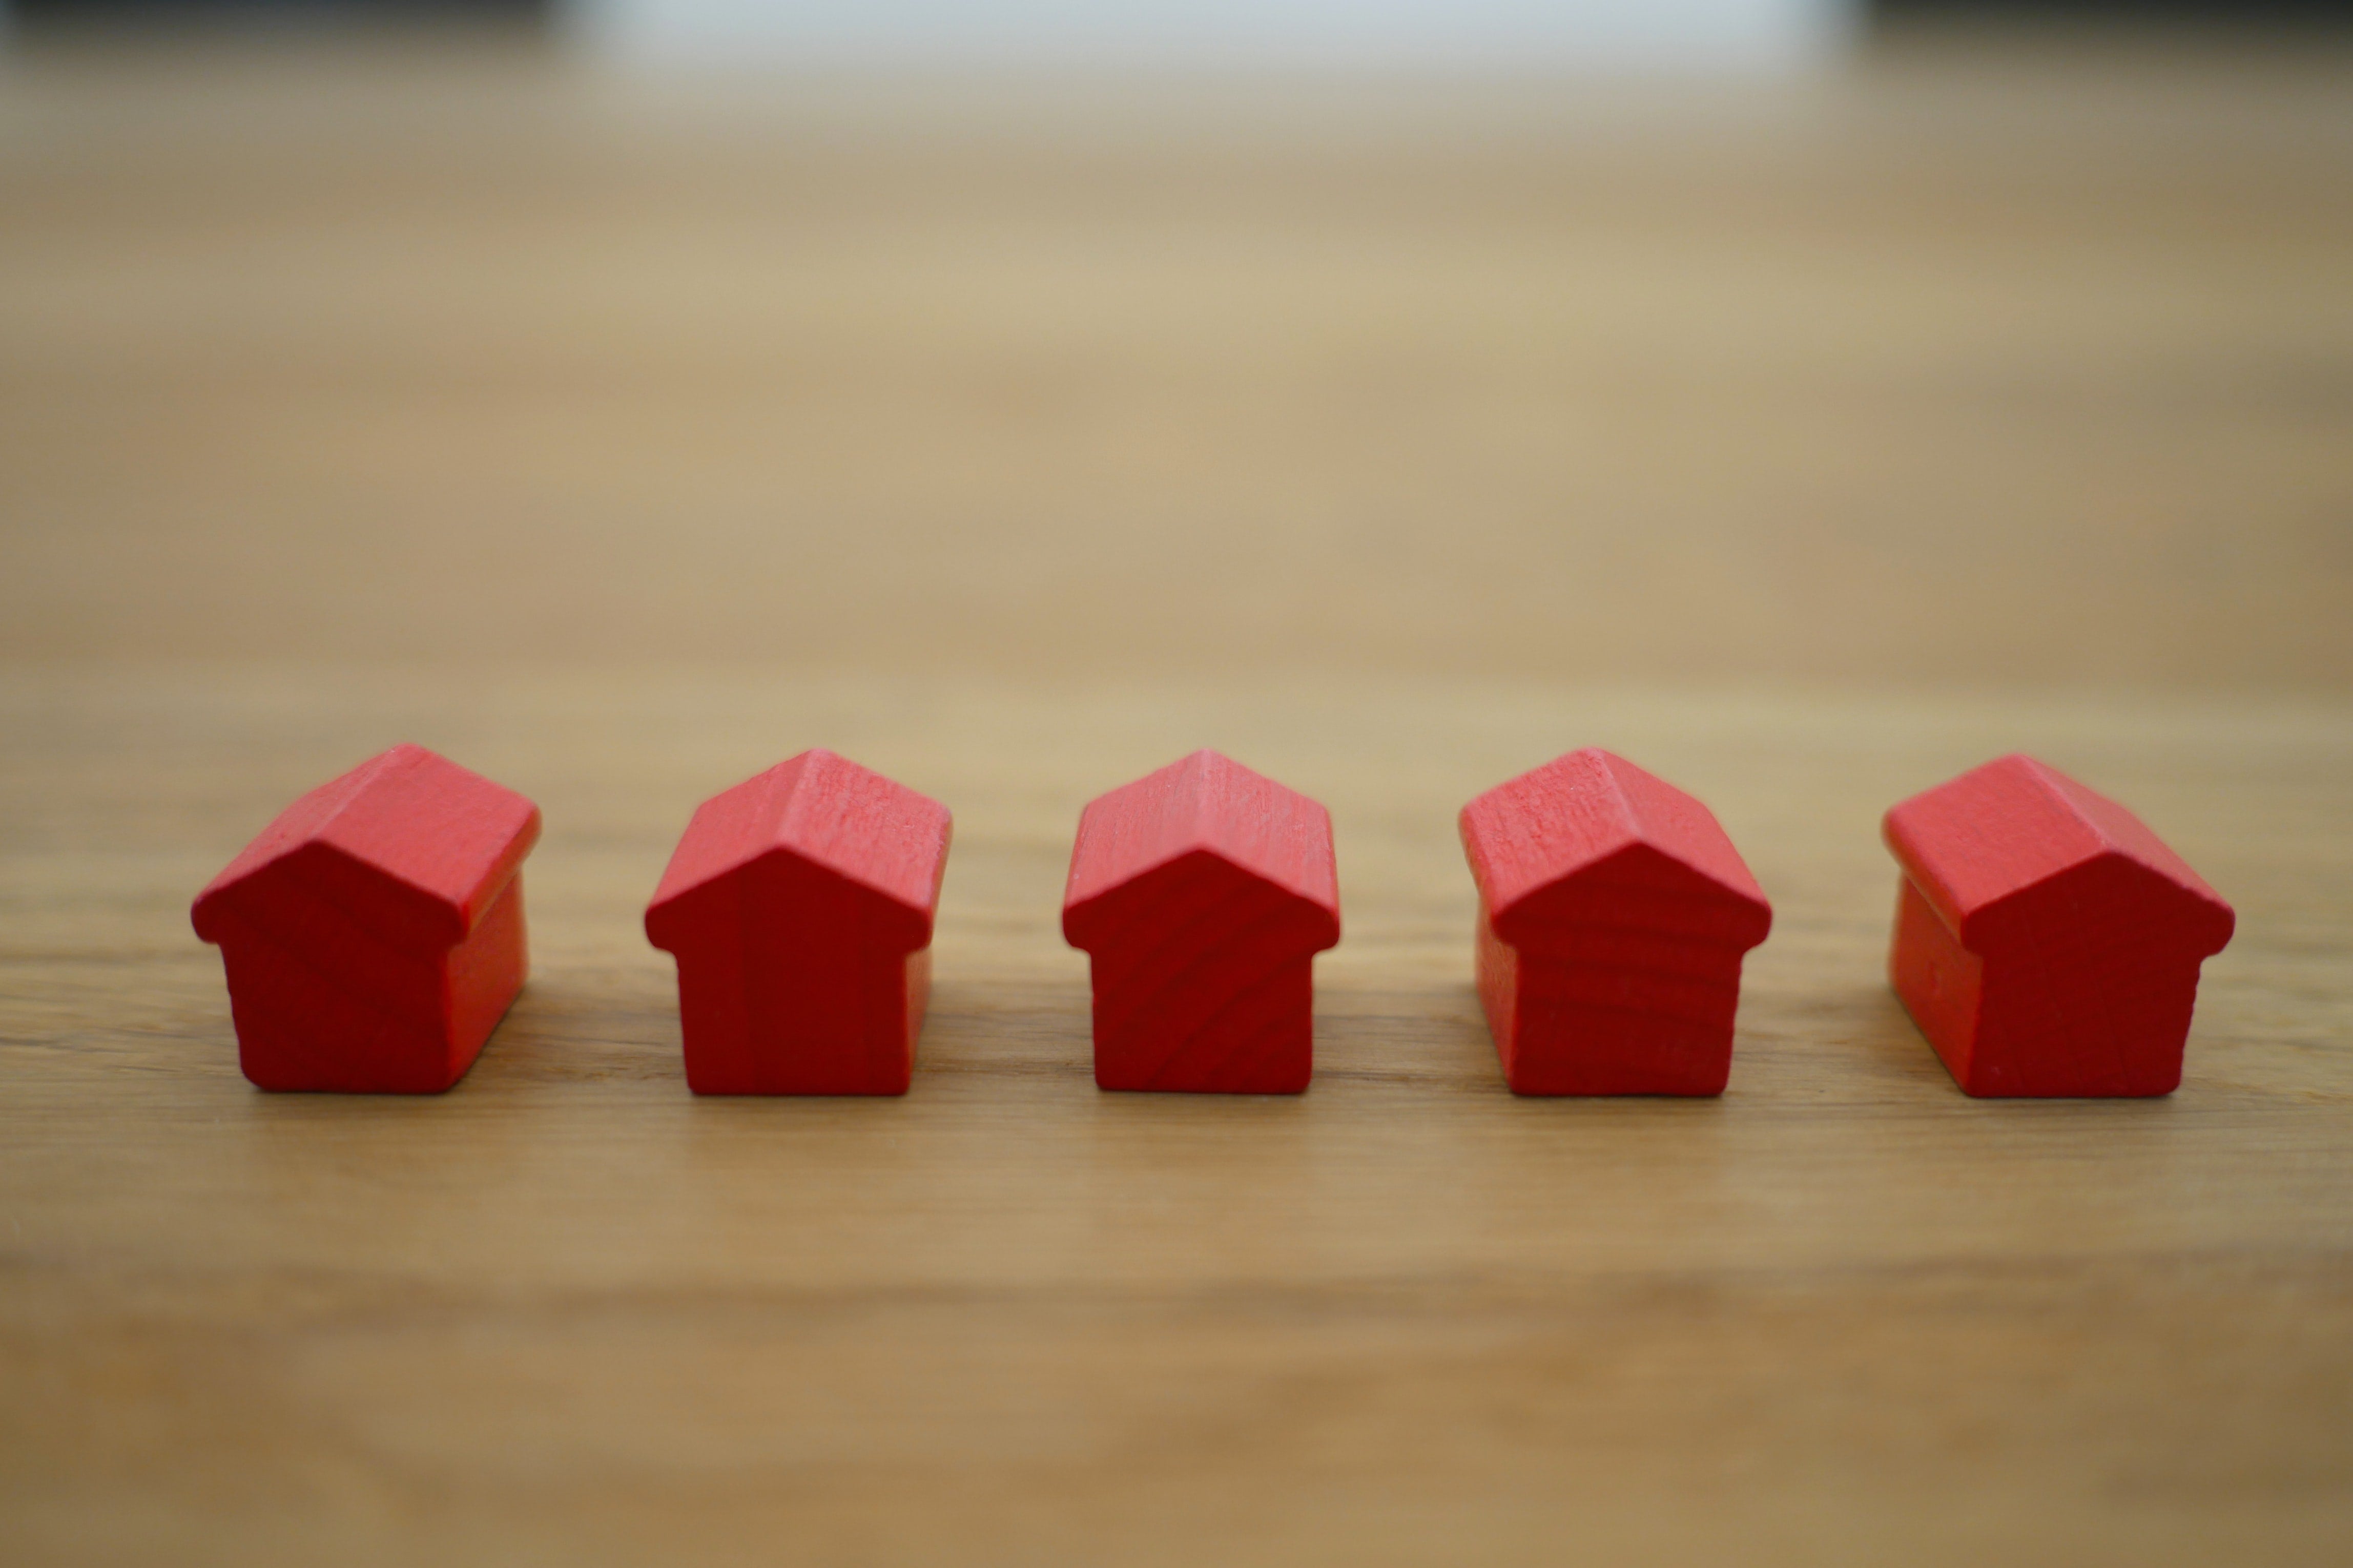 Five small red toy houses lined up on a wooden counter.